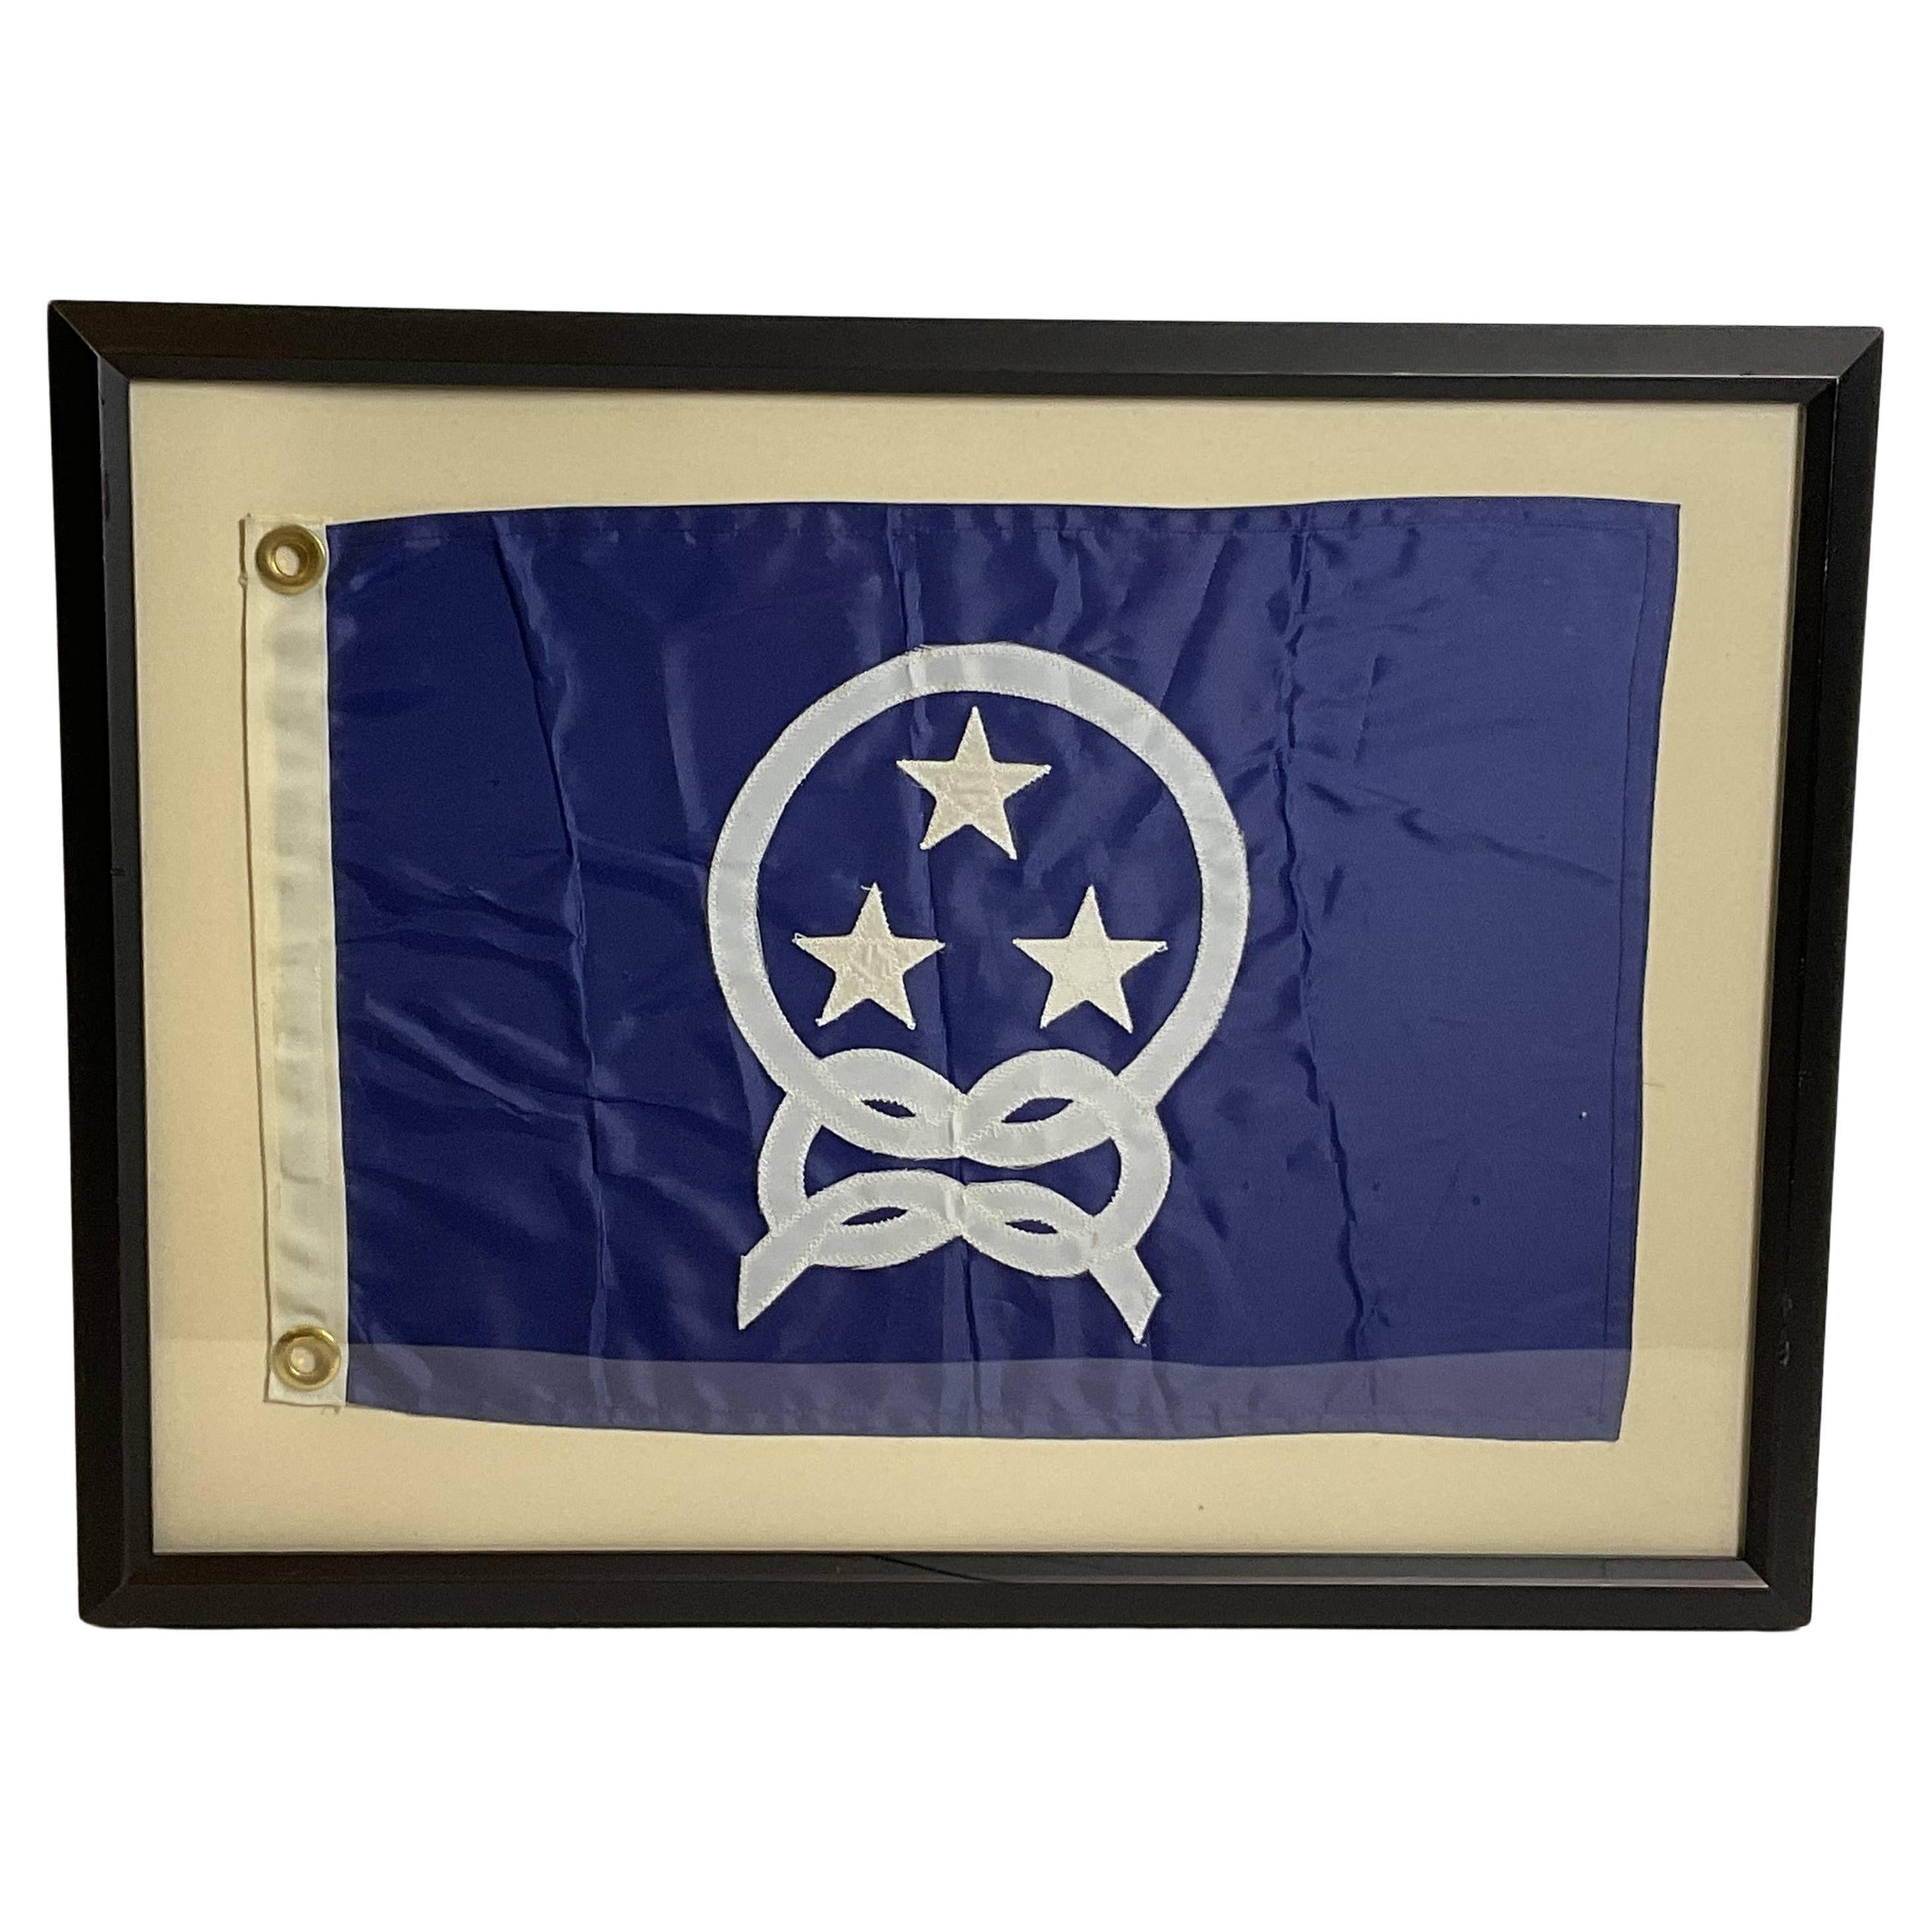 Yacht Club Commodores Flag For Sale